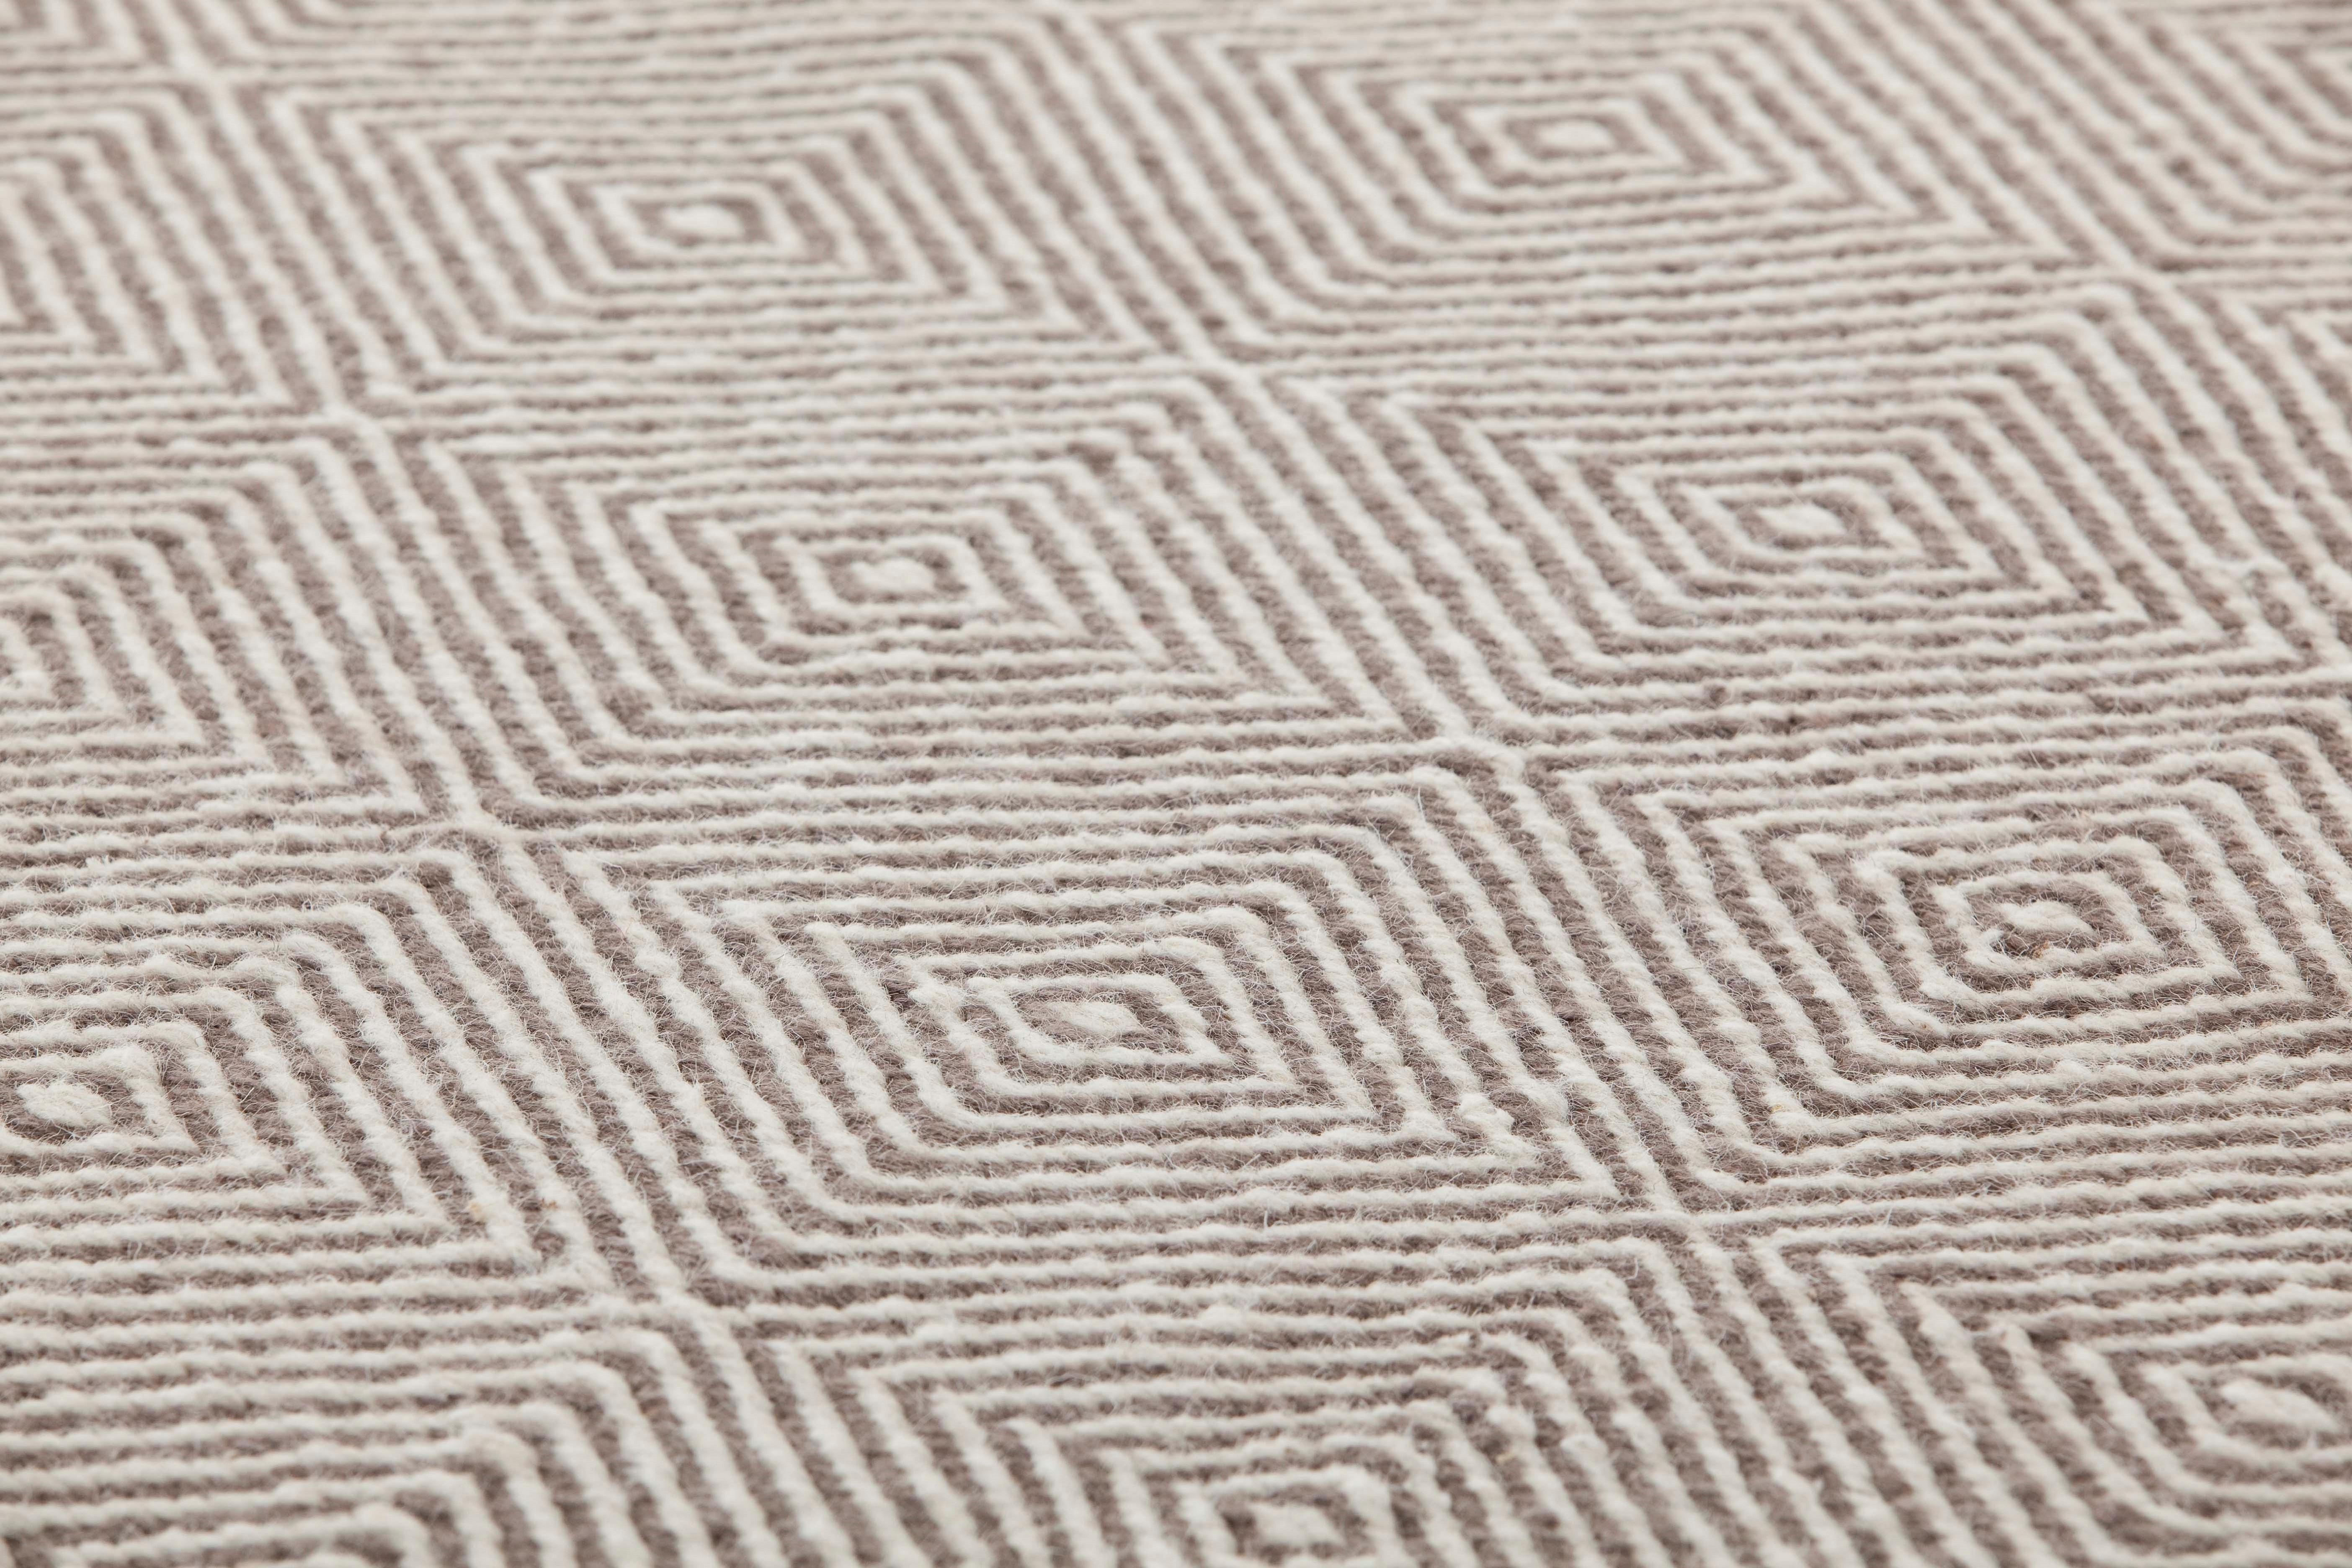 Dhurrie wool is transformed and grows in volume. Urban, sober and essential, it reveals myriad new possibilities. 

Additional information:
Material: Jute. 100% wool. Reversible
Color: Taupe
Technique: Dhurrie
Dimensions: 79 W x 118 D x 0.39 H